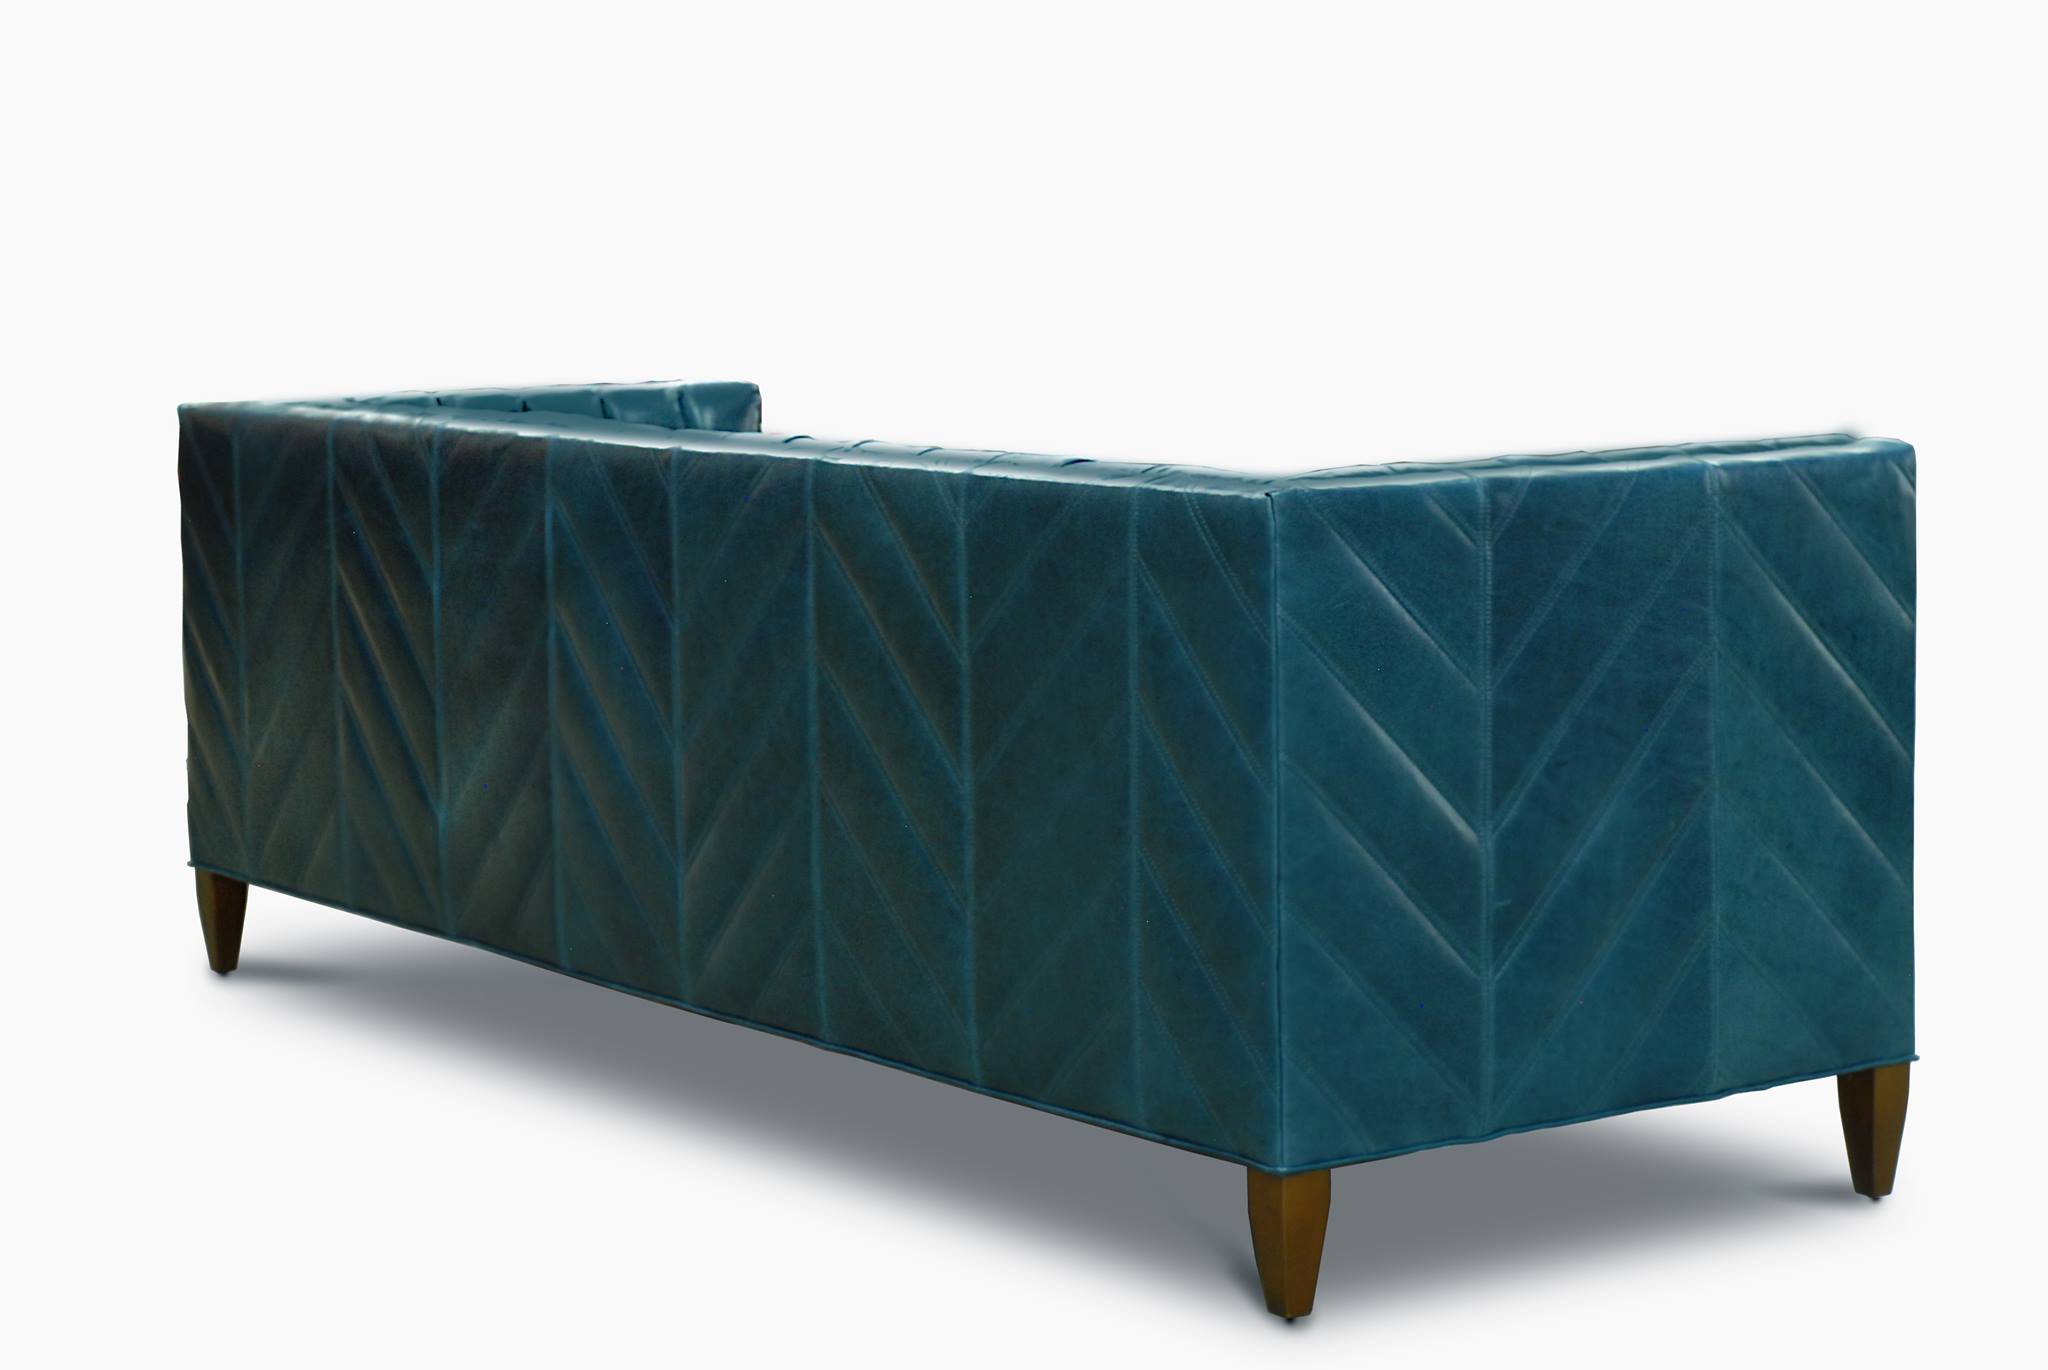 Cyan Leather Vertical Channel Tufted Mid-Century Lambert Sofa